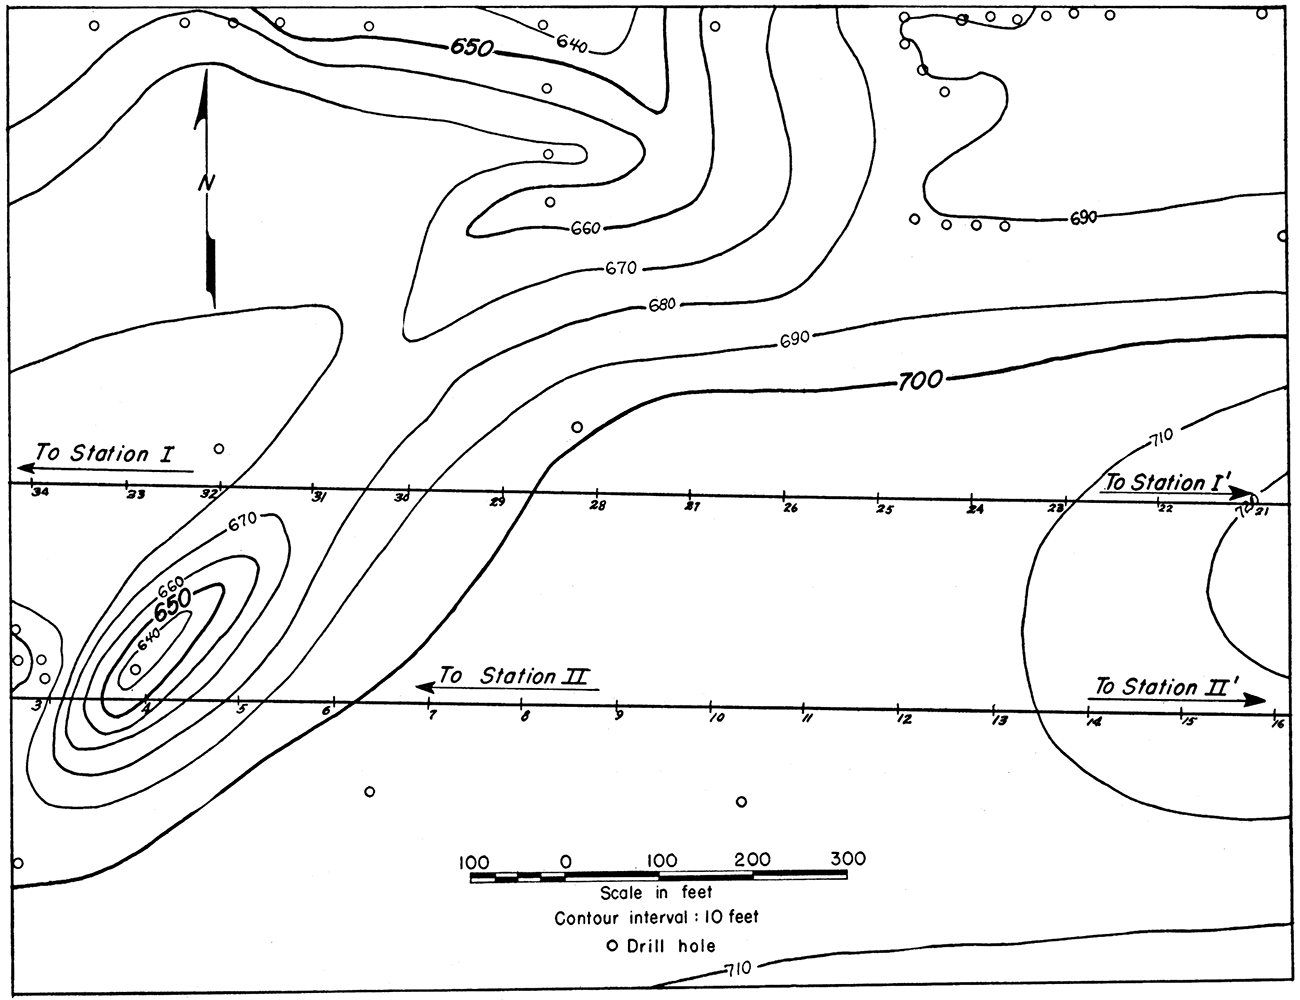 Map showing contours on the top of the limestone and traverse lines in the Jarrett area.